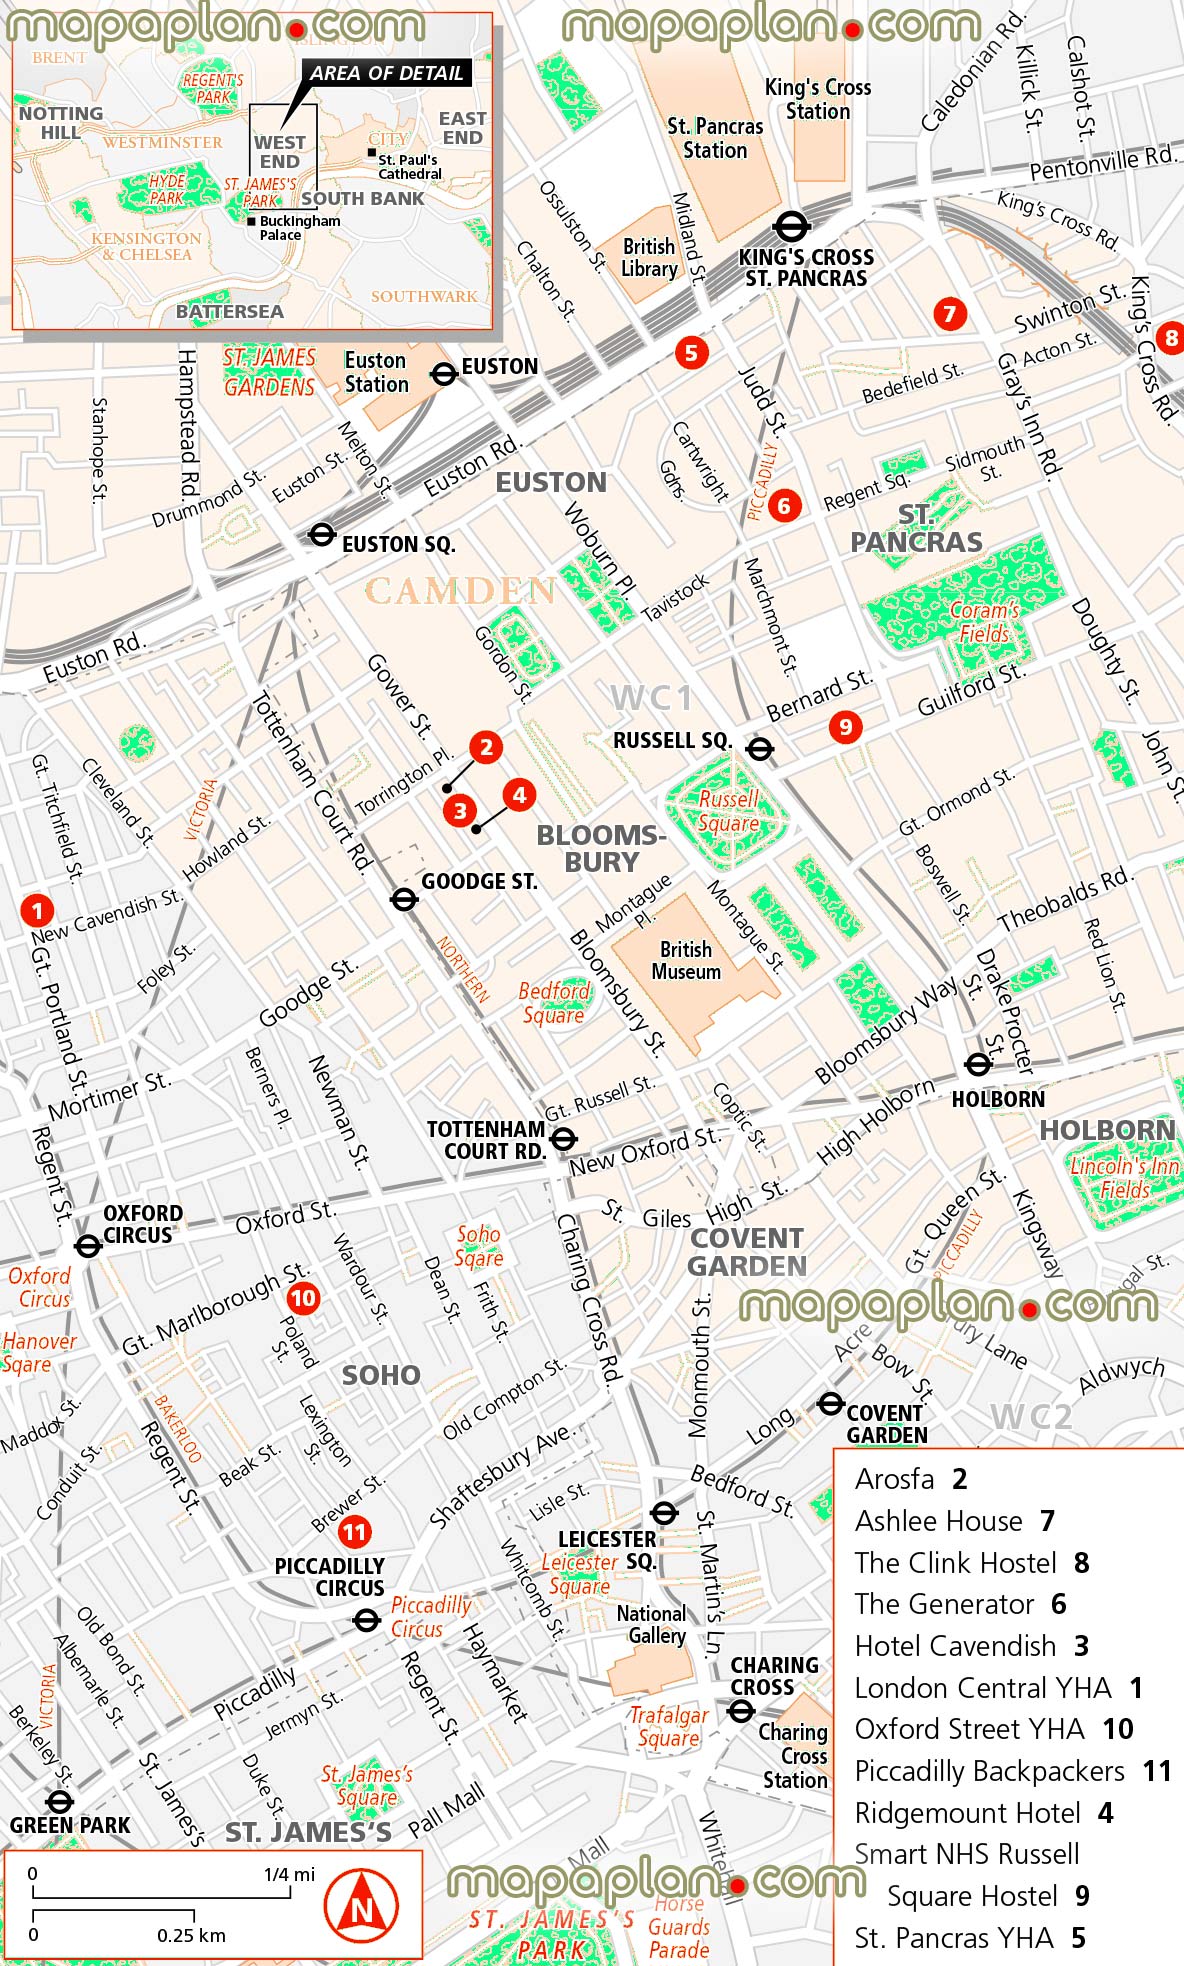 west end cheap hostel accommodation good value budget hotelss London Top tourist attractions map